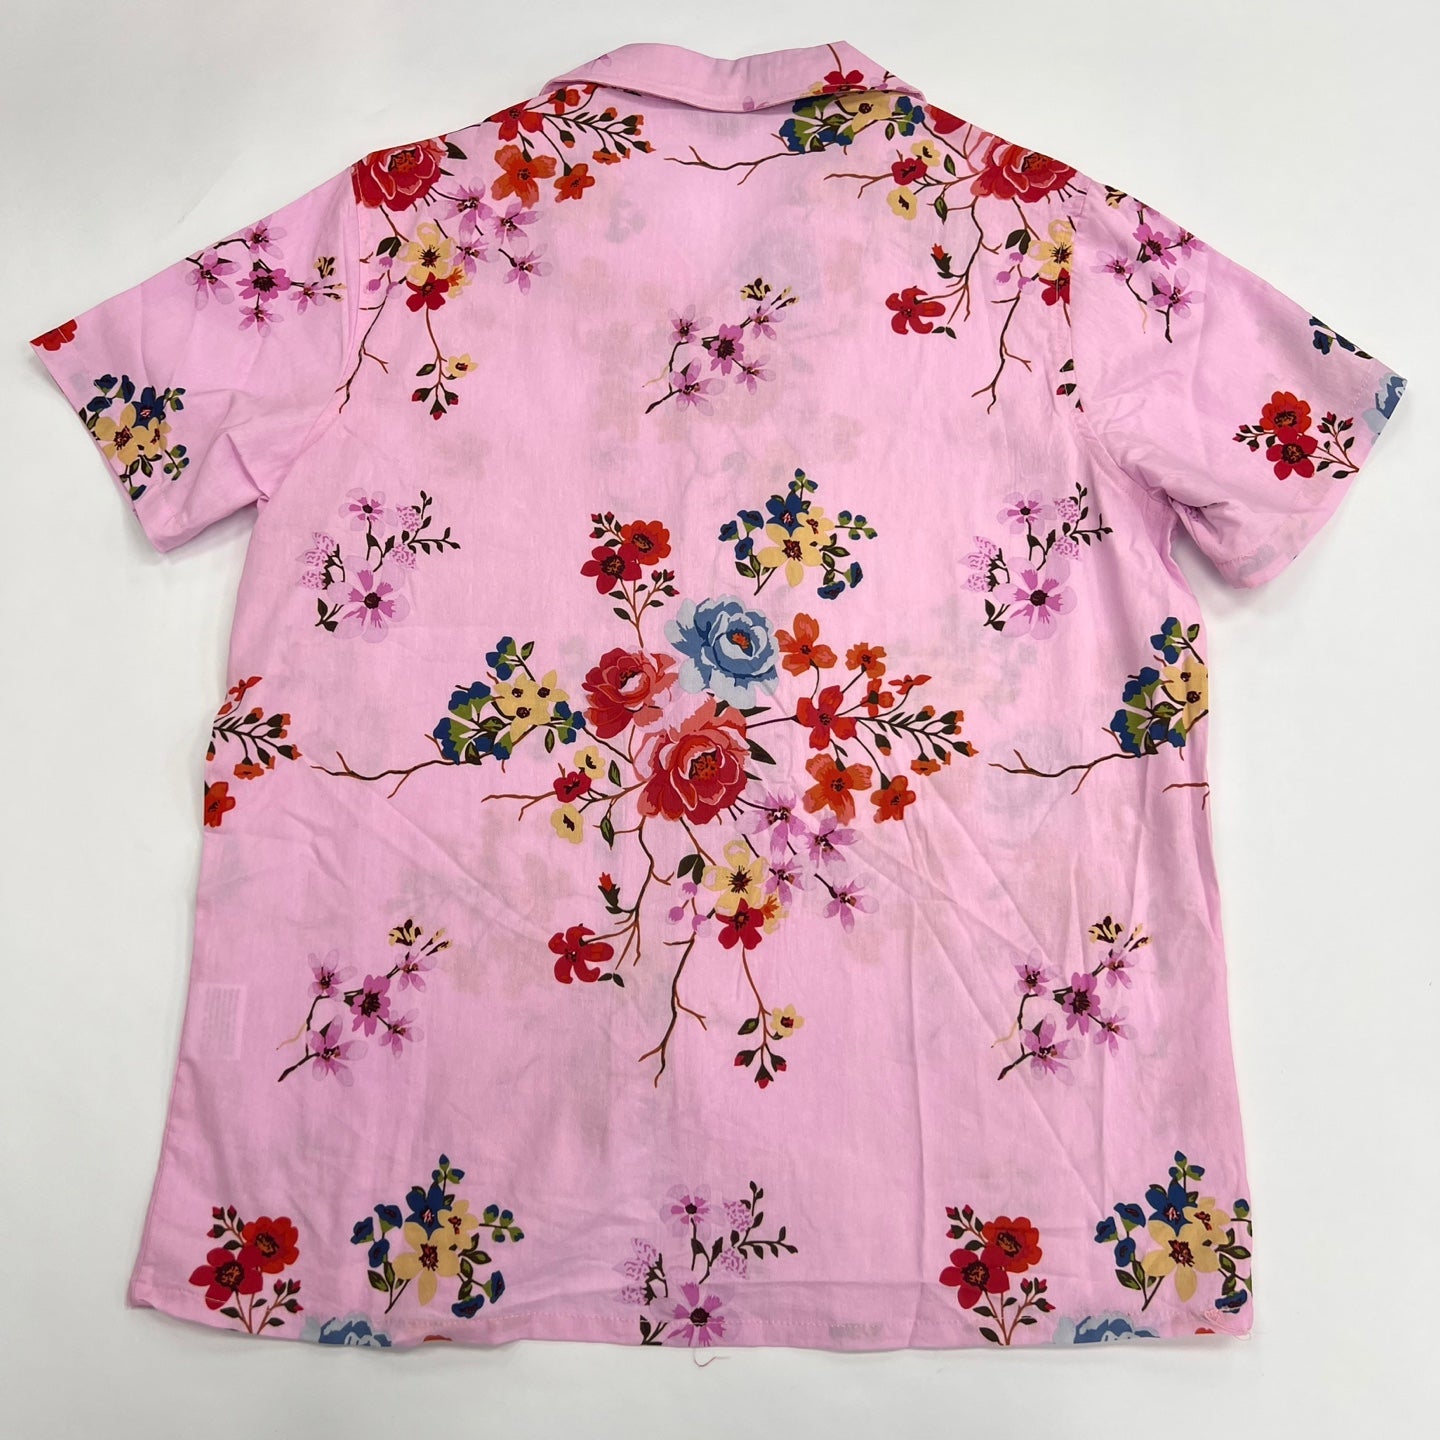 SWTICH Floral Graphic Print Woven Shirts - Pink